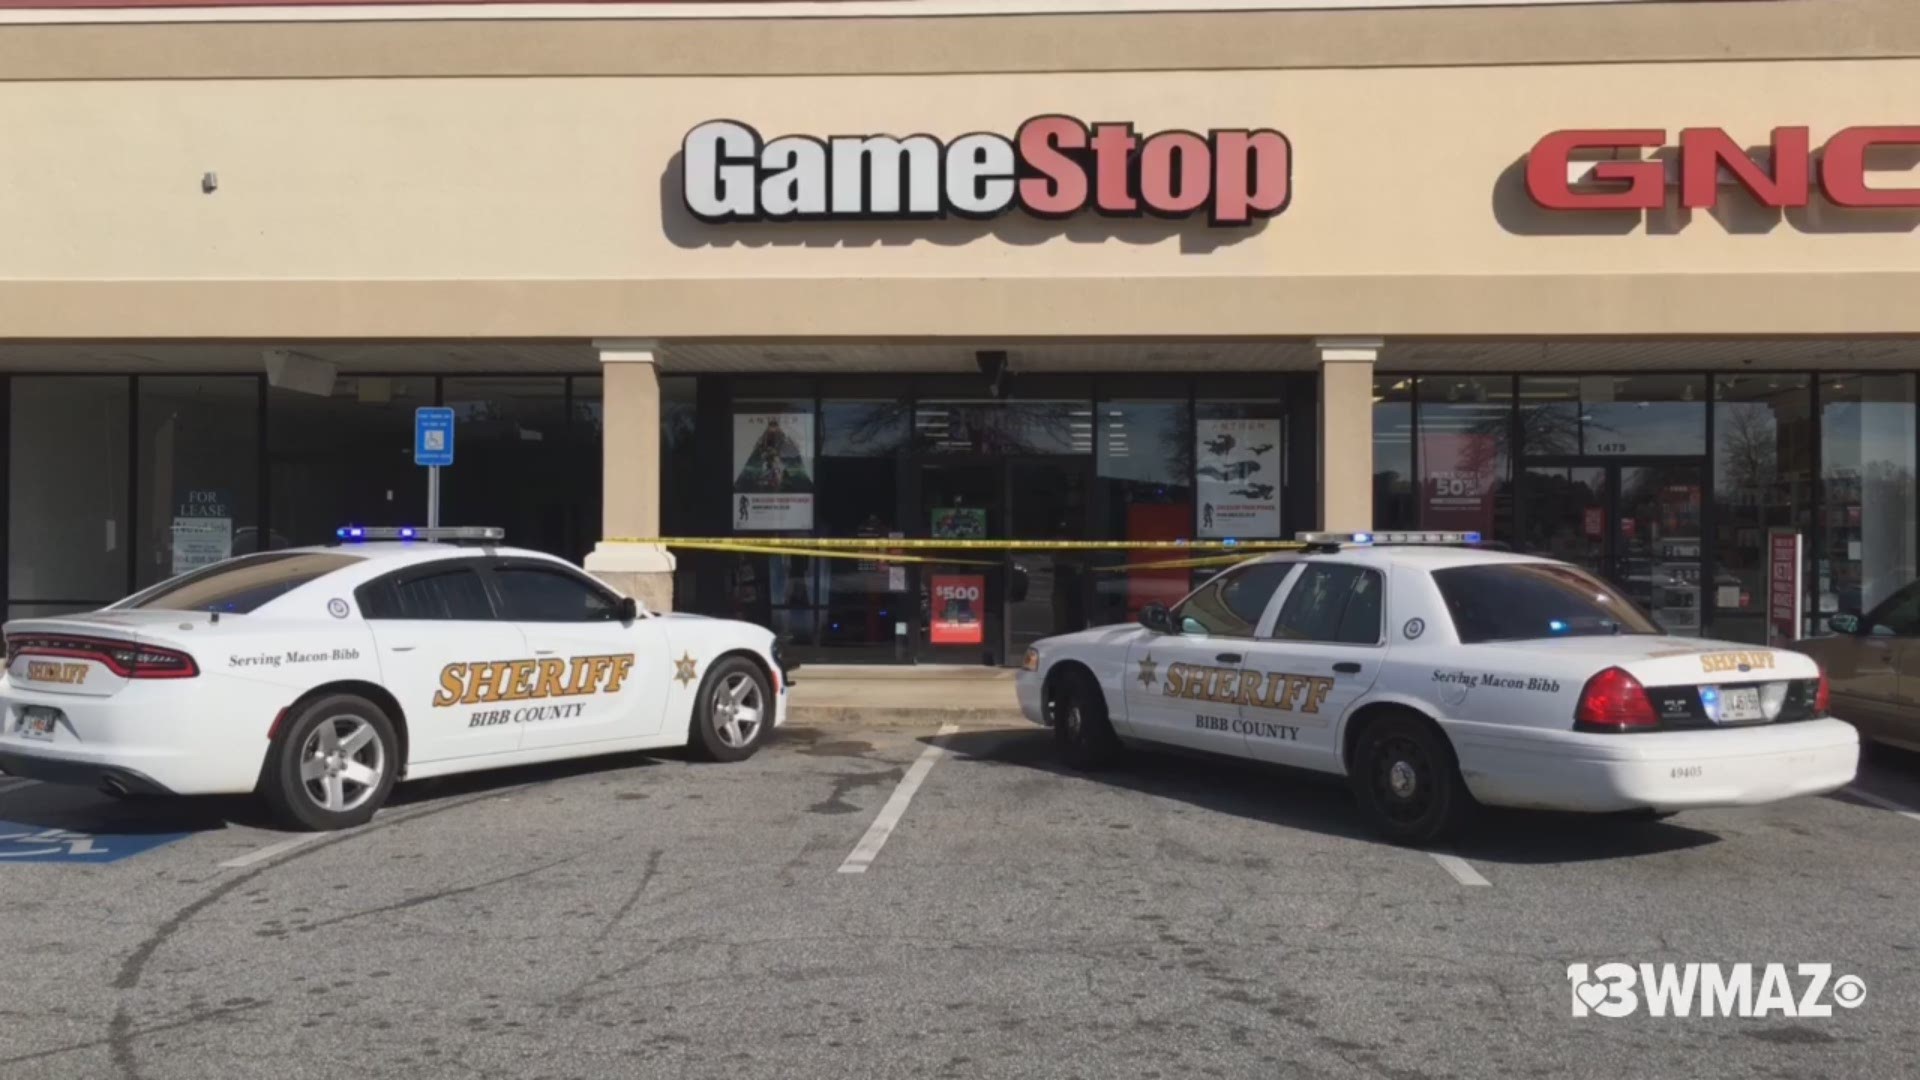 The Bibb County Sheriff's Office says the robbery happened around 10 a.m. on Monday.